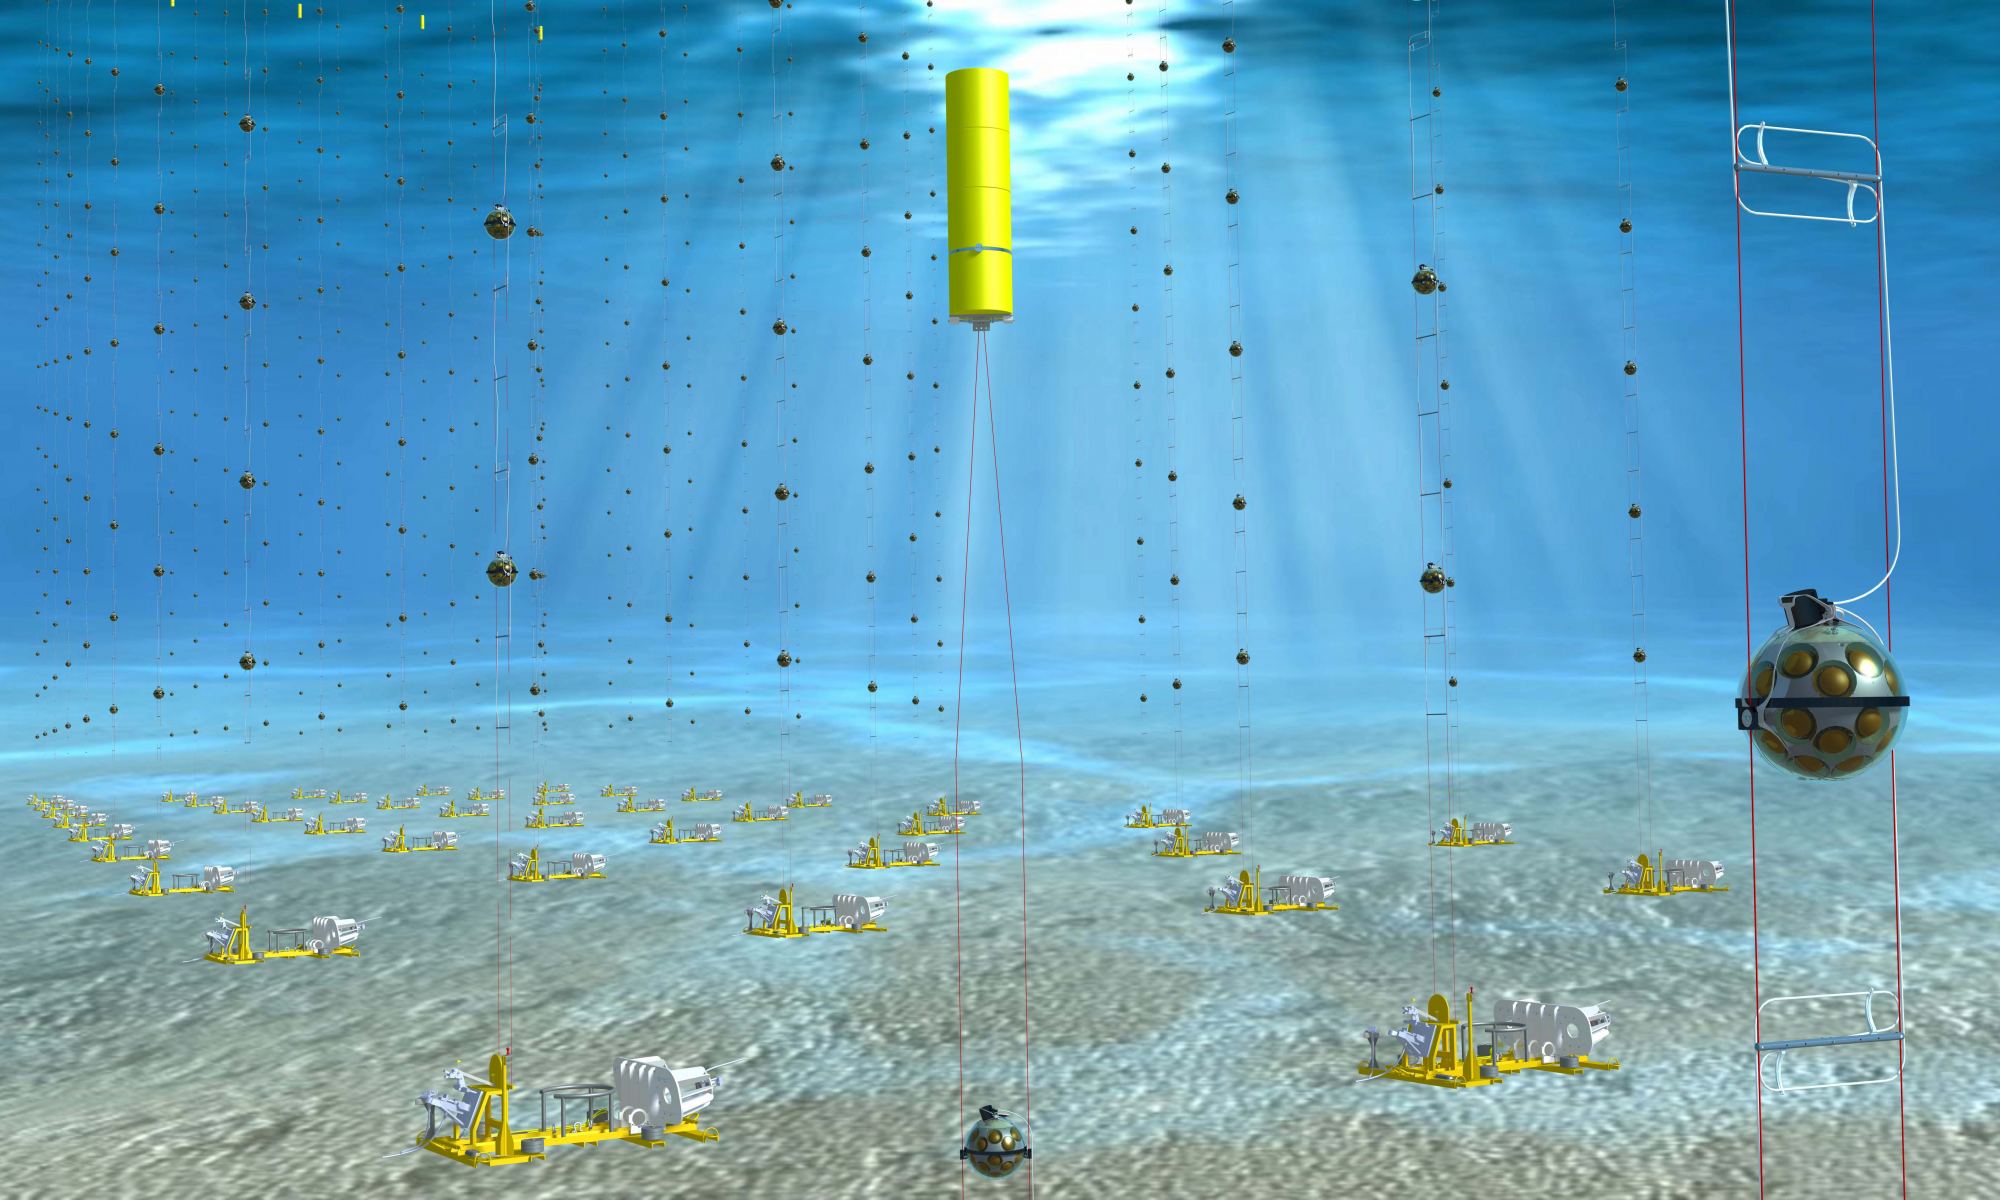 Underwater neutrino detectors take advantage of location to track these fast particles. This is an artist's impression of a KM3NeT installation in the Mediterranean. Chinese scientists hope to build a bigger underwater "neutrino telescope" in the next few years. Courtesy Edward Berbee/Nikhef.